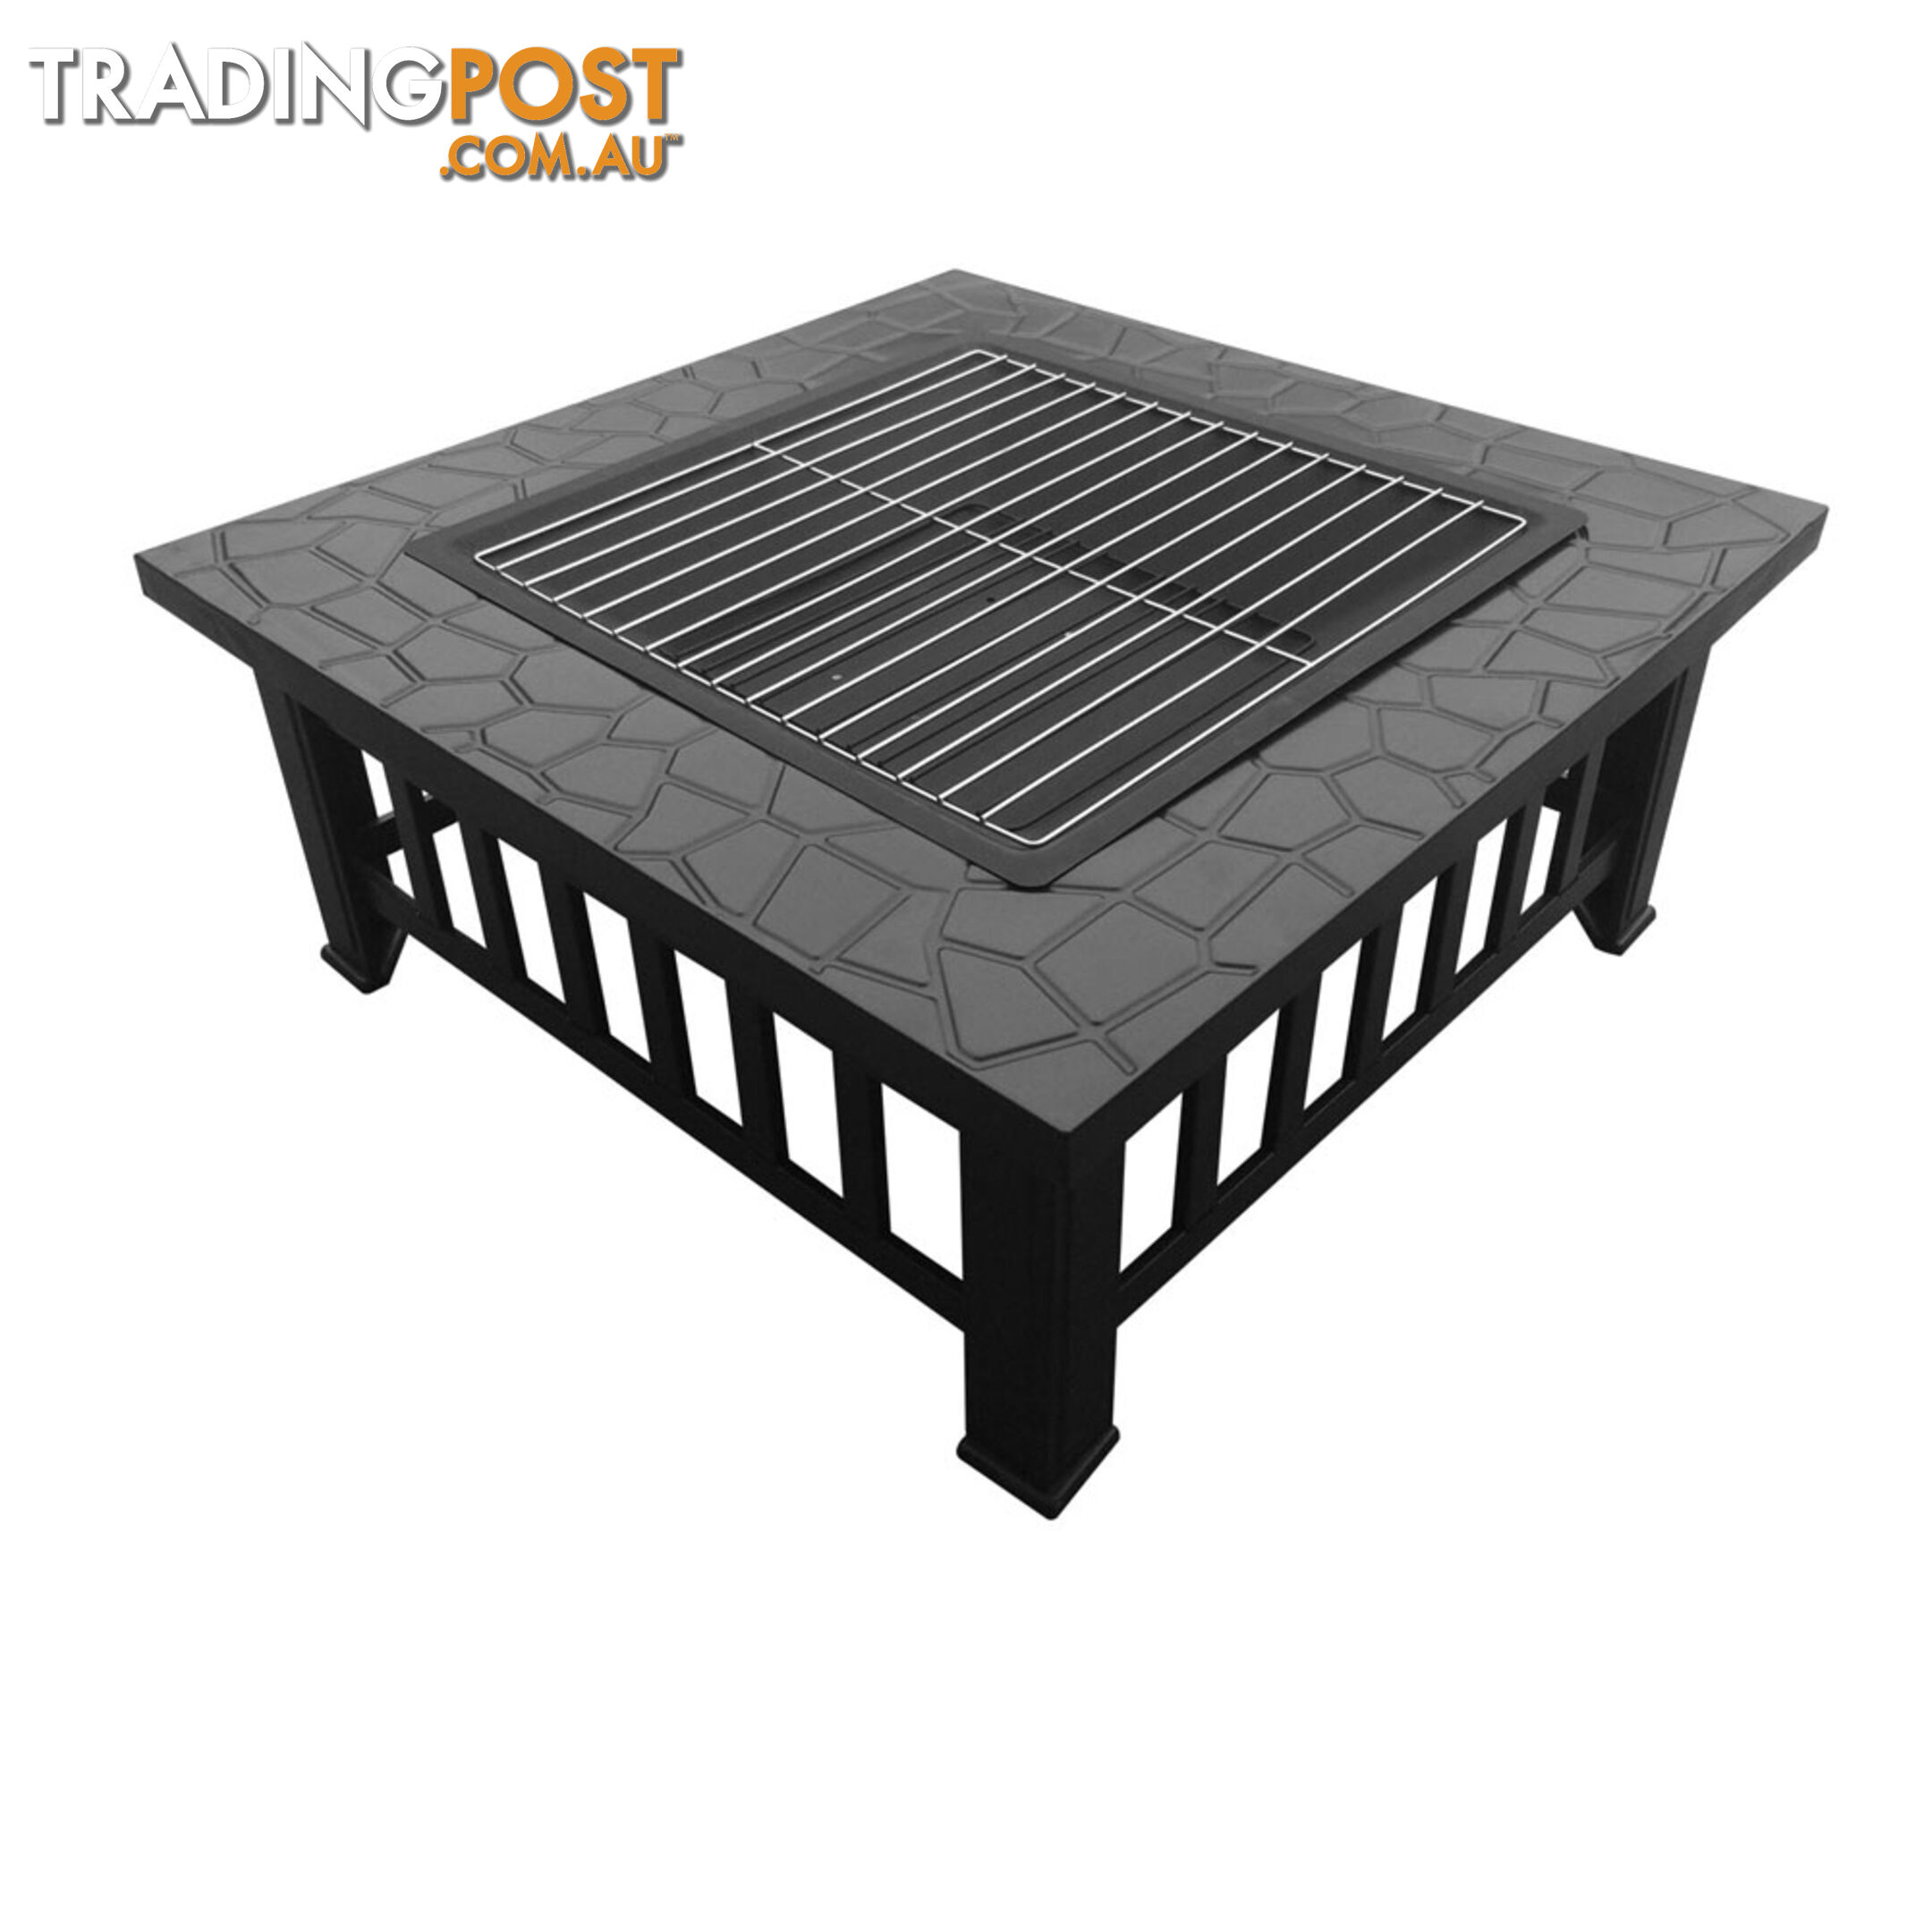 2 In 1 Outdoor Garden/Patio/Camping Fire Pit BBQ Table Grill Fireplace